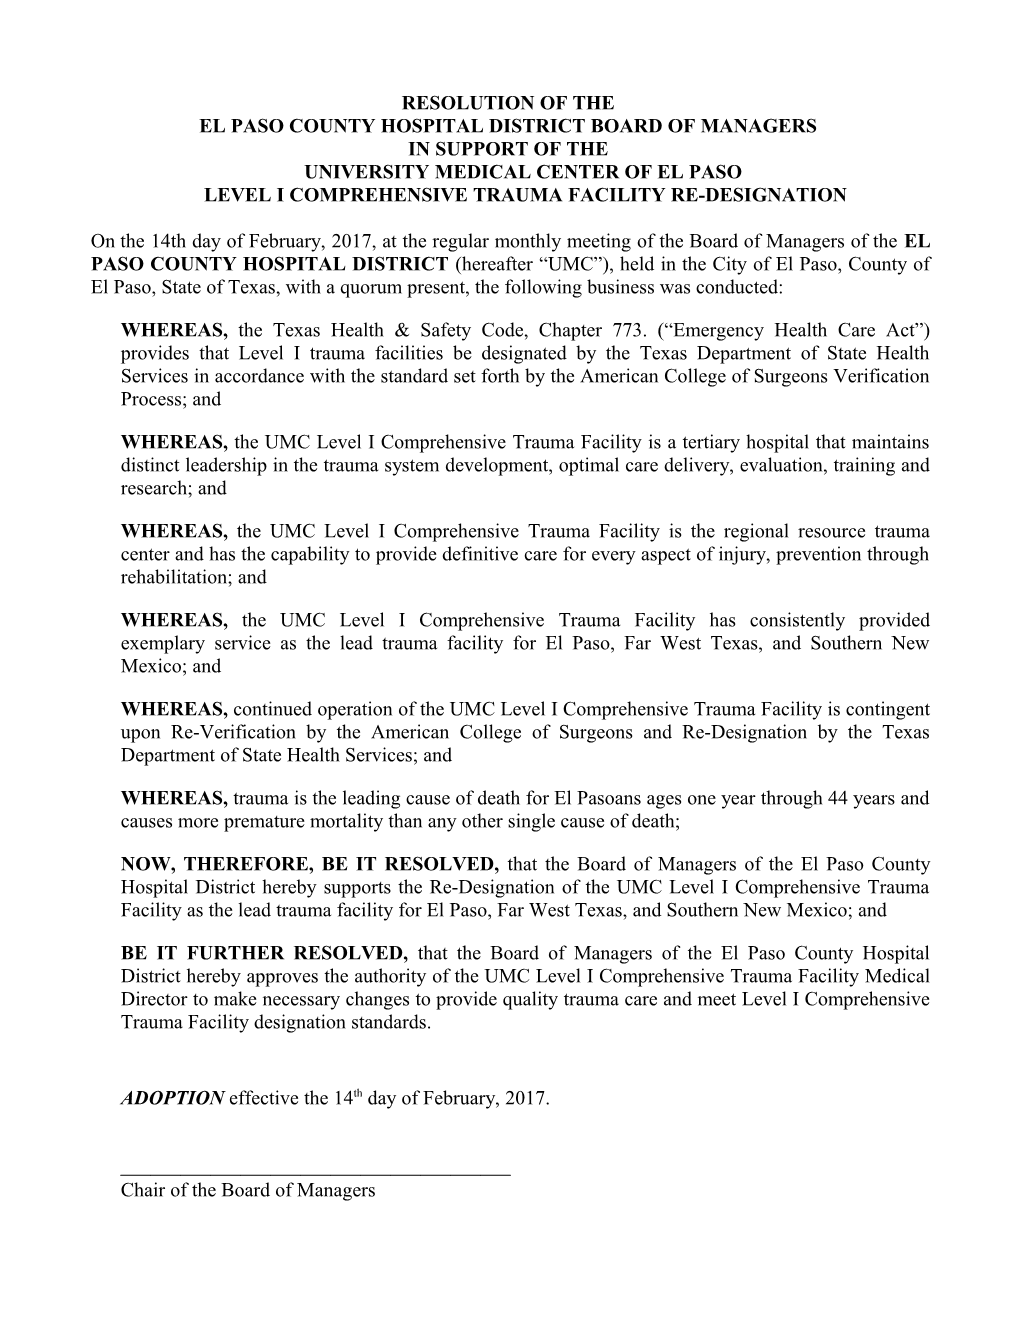 Resolution of the Board of Managers of the El Paso County Hospital District Amending The